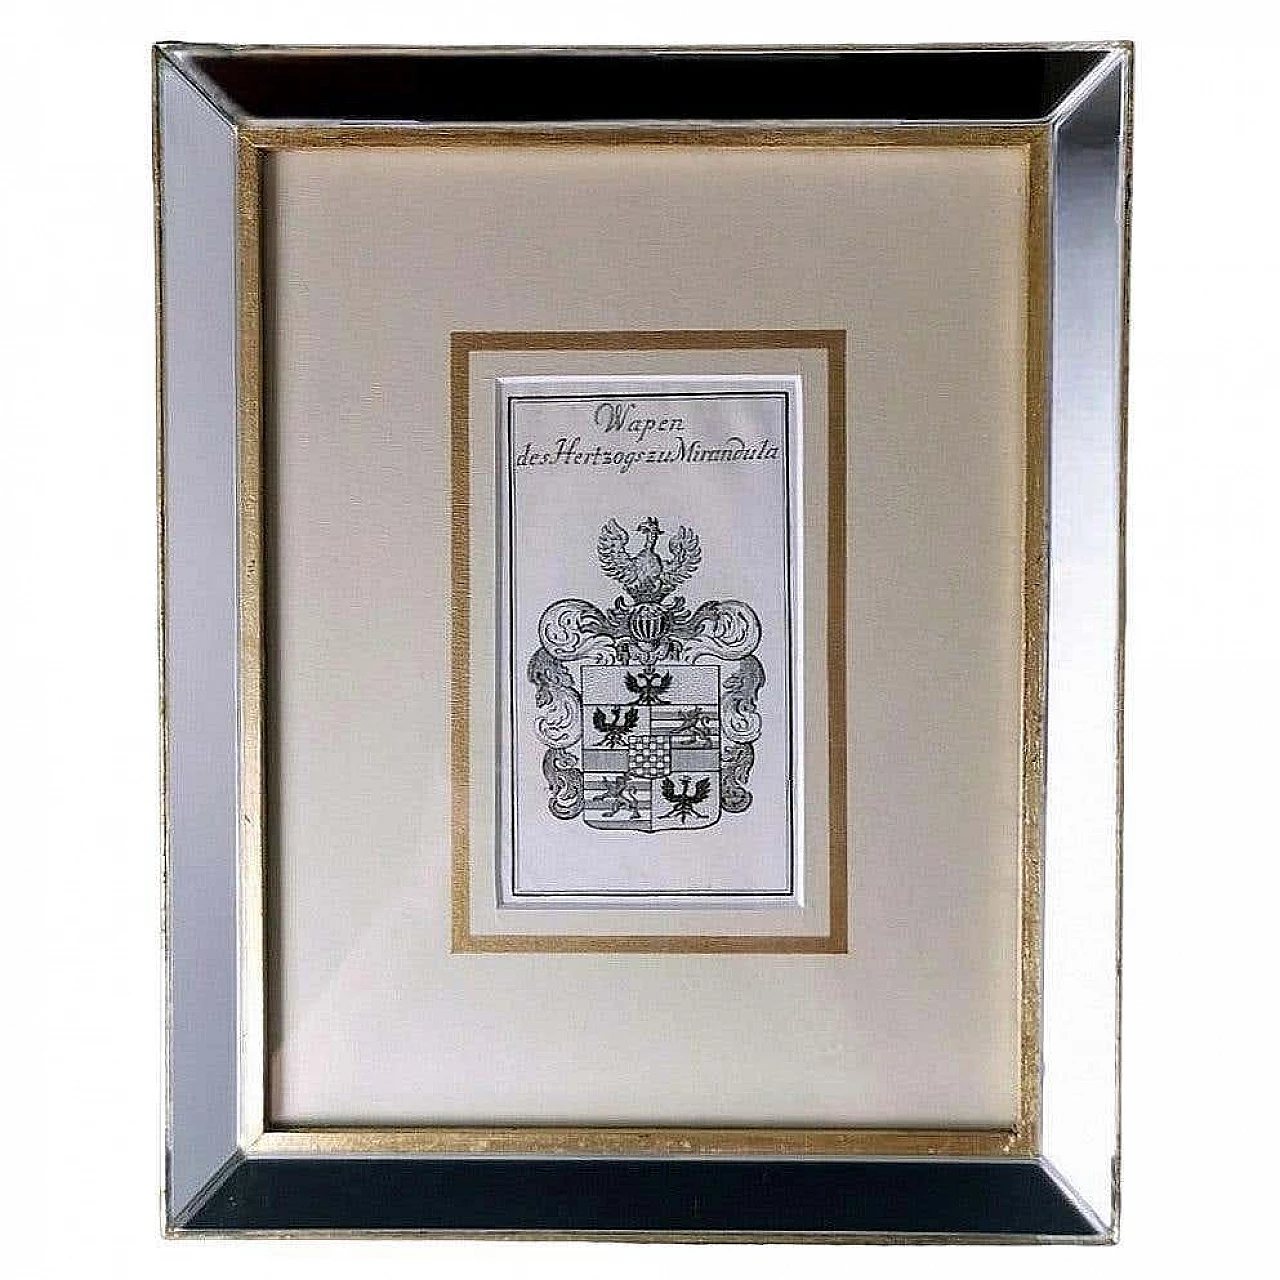 Engraved Dutch print depicting the coat of arms of the Dukes of Mirandola with mirrored frame, 17th century 15